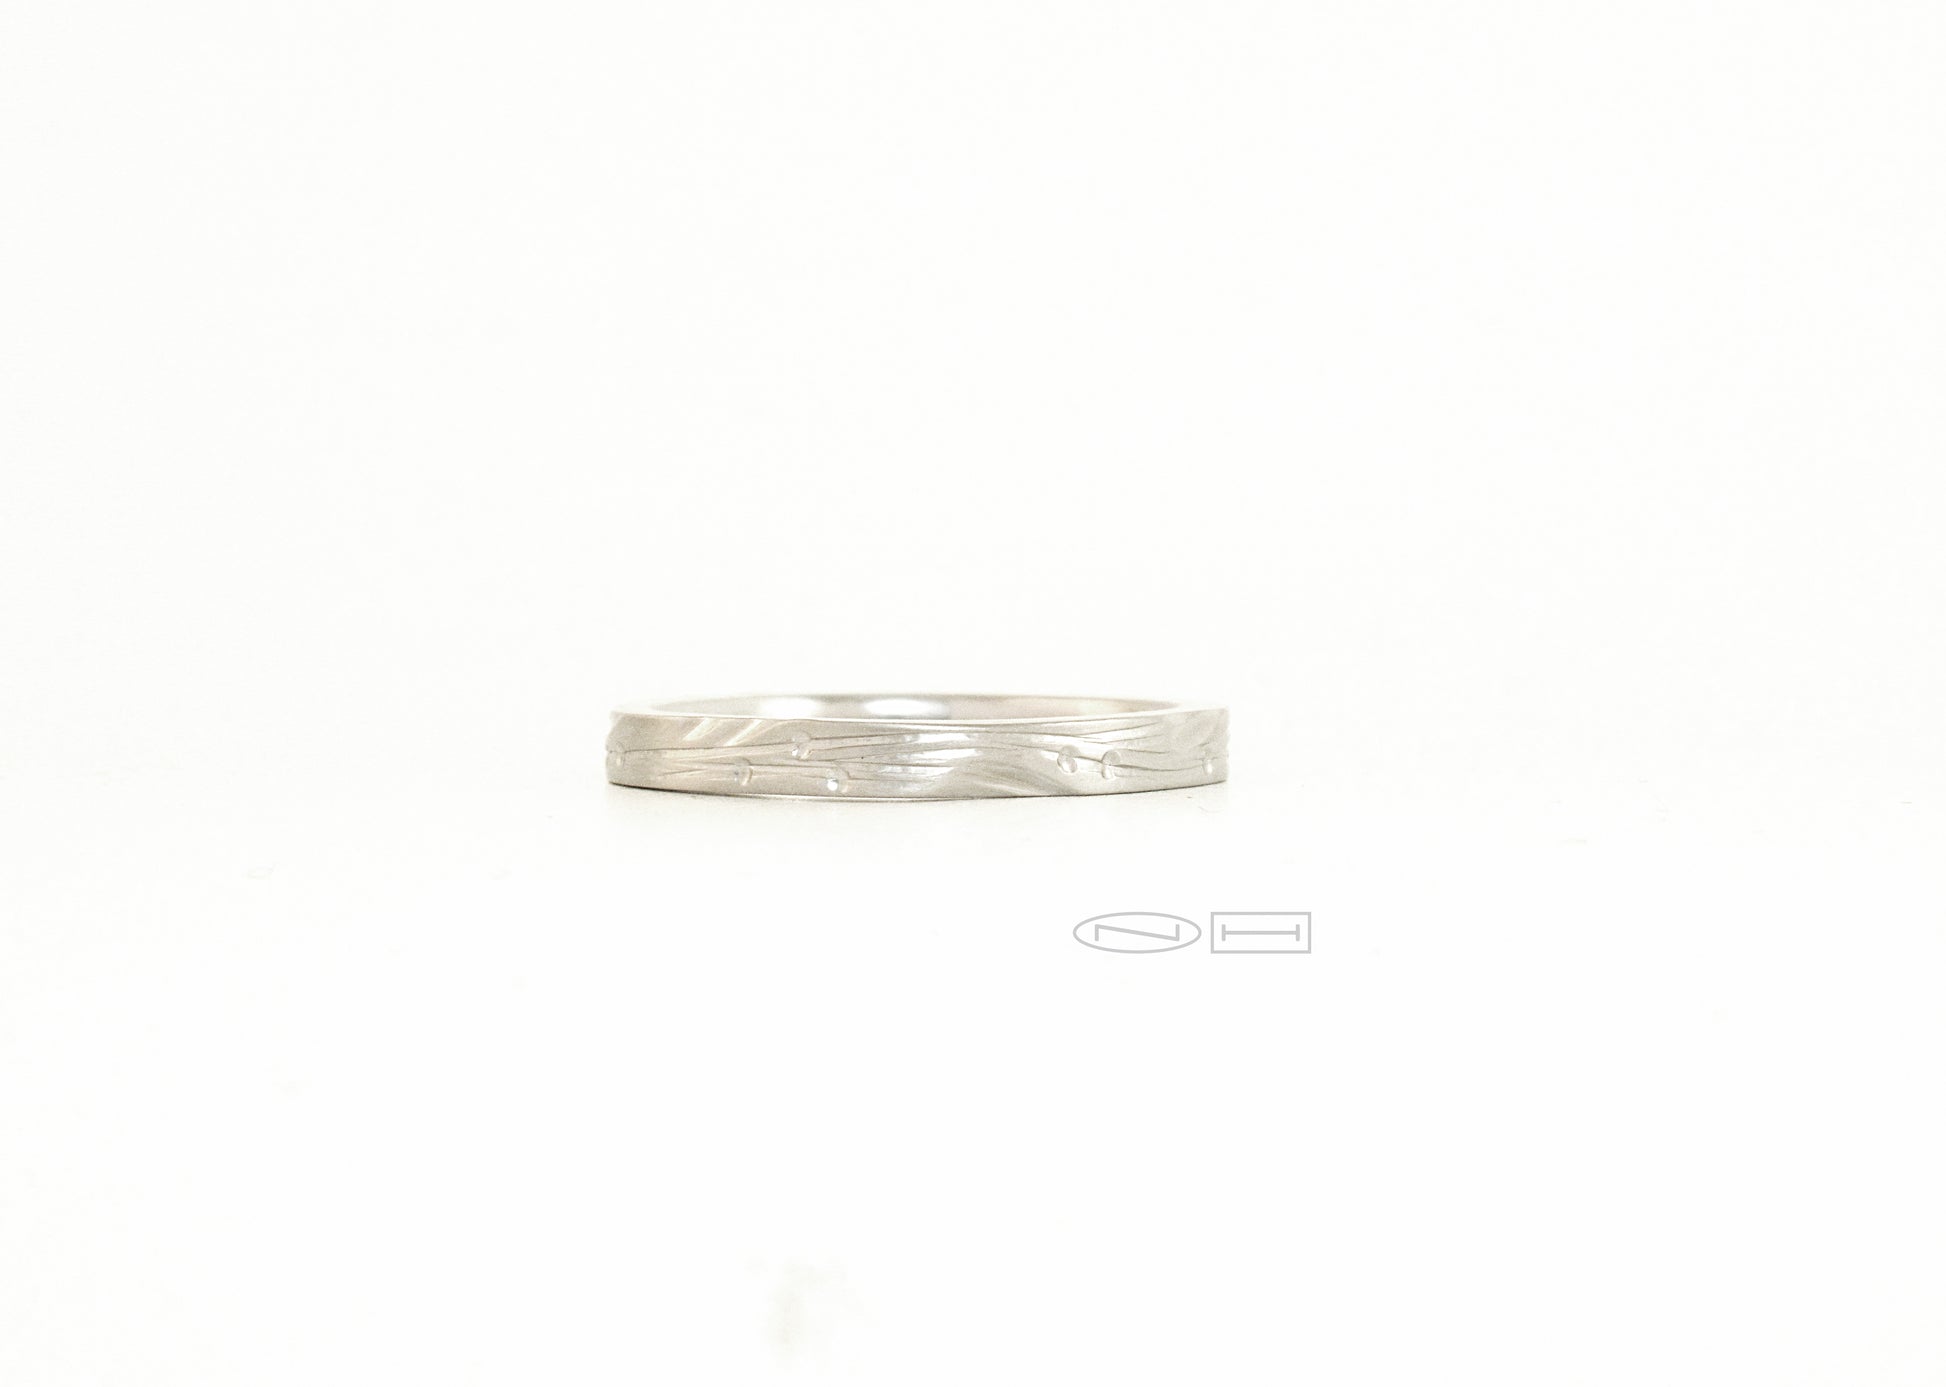 Leaf and vine soft shaped square ring or round with carved vines and stamped leaves, 2.5 m/m width  Available in sterling silver, 18kt or 14kt Gold, and platinum by ZEALmetal, Nicole Horlor, in Kingston, ON Canada